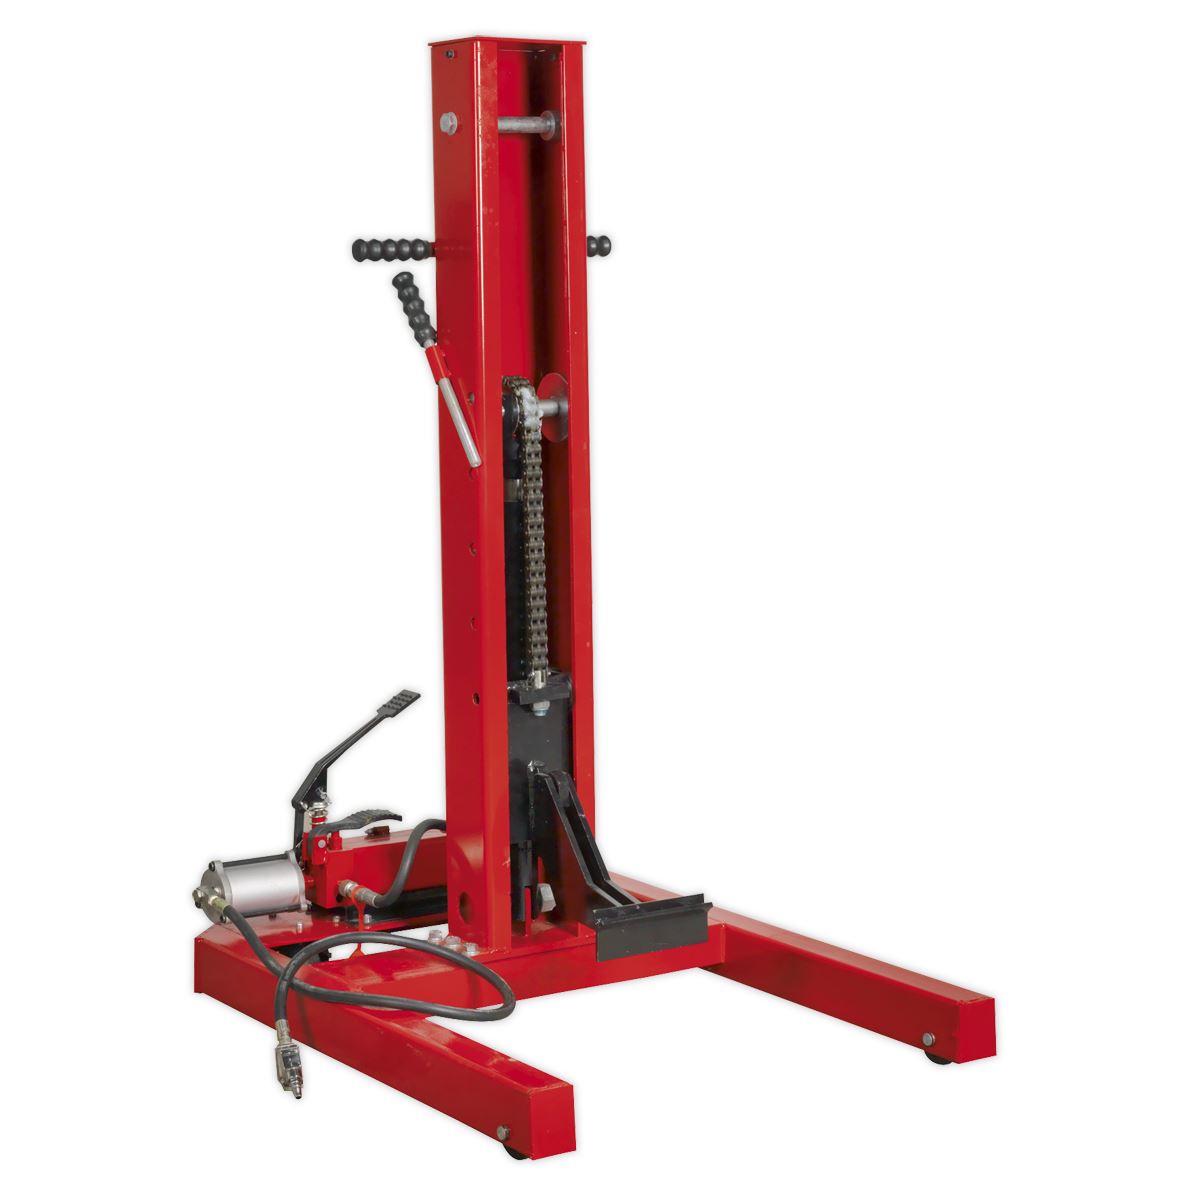 Sealey Air/Hydraulic Vehicle Lift with Foot Pedal 1.5 Tonne